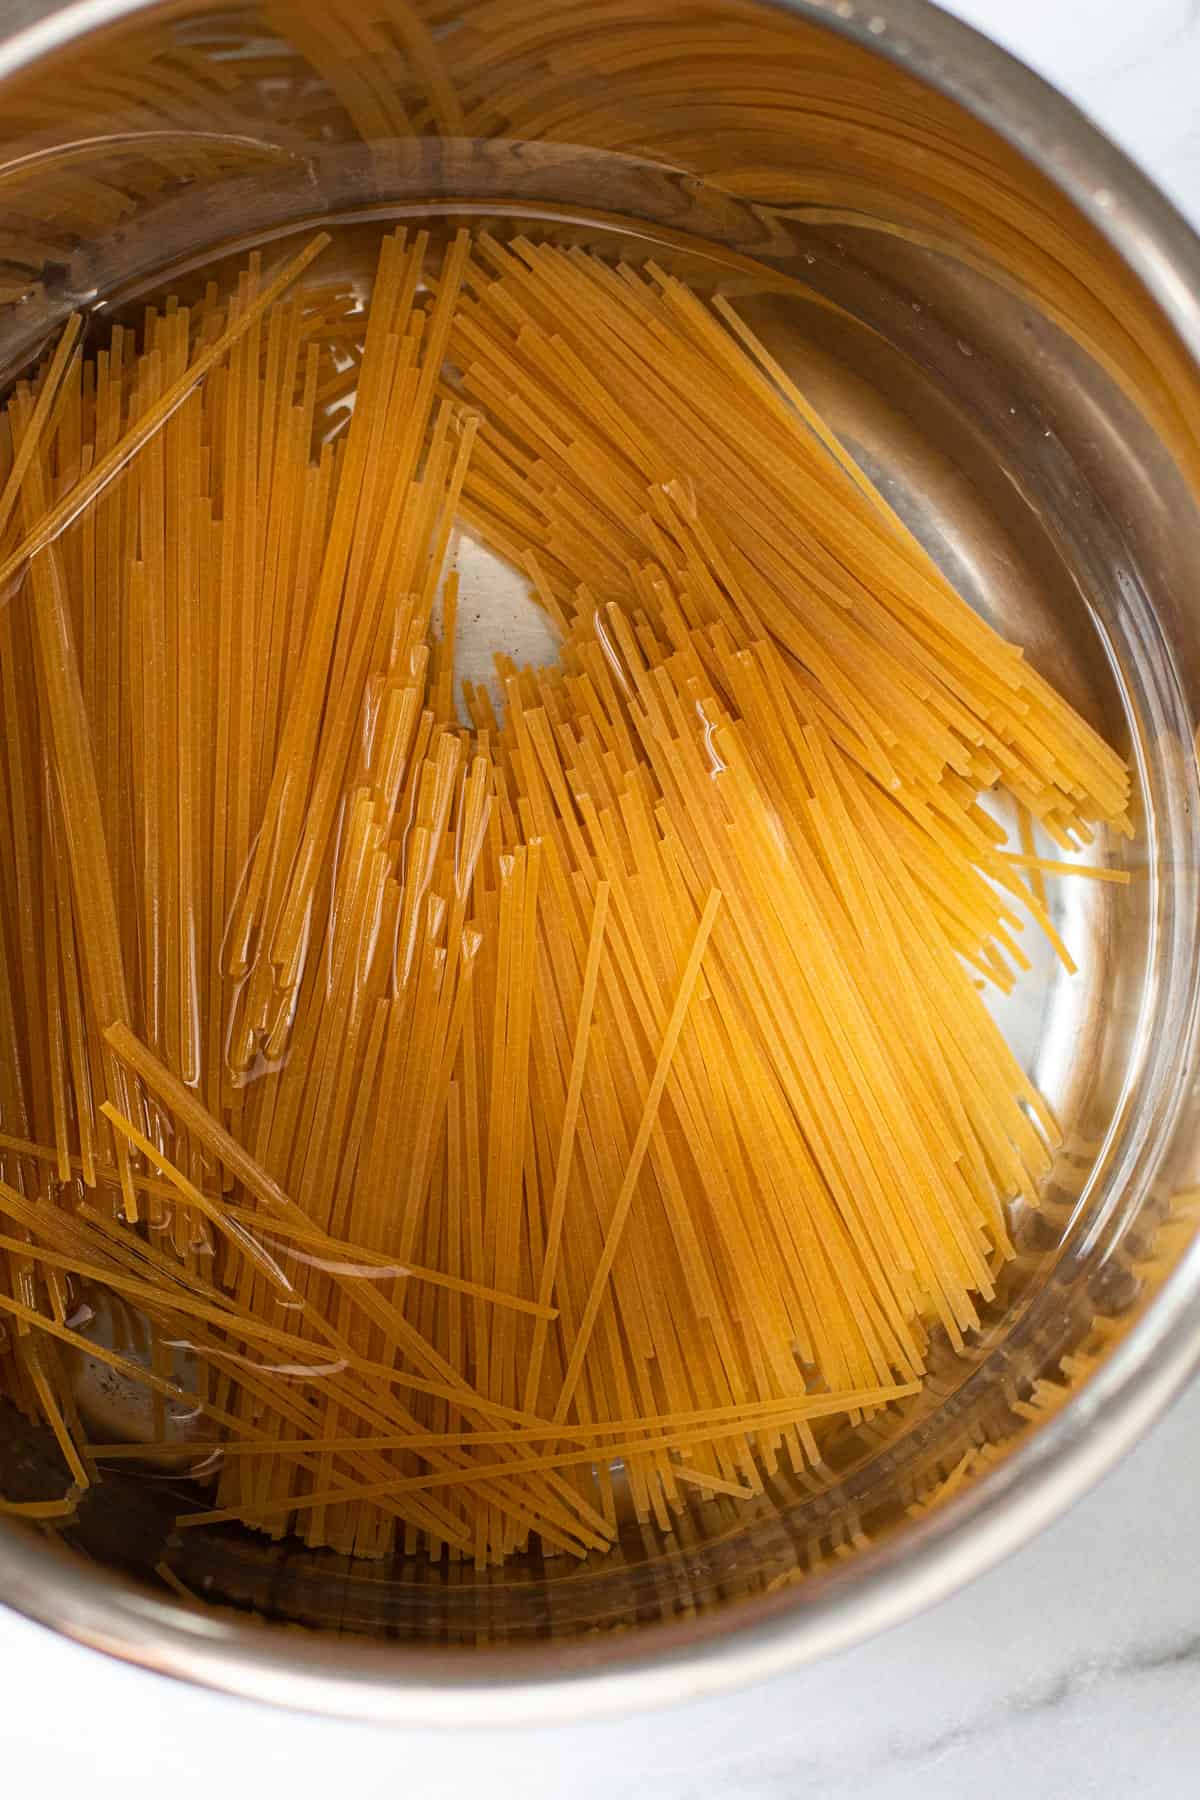 How to Cook Pasta in the Instant Pot - Lexi's Clean Kitchen